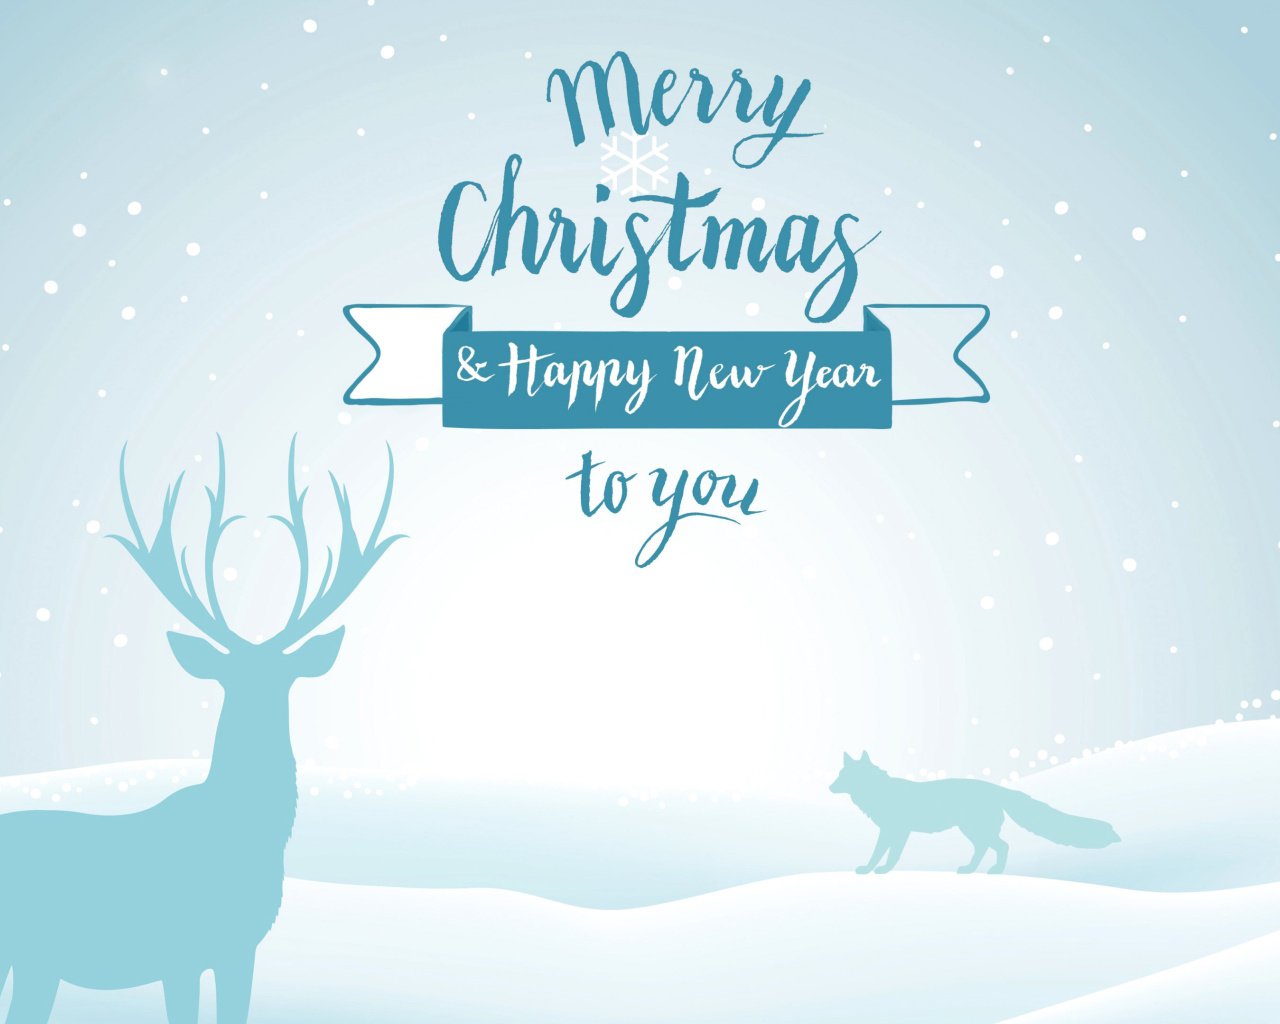 Merry Christmas and Happy New Year wallpaper 1280x1024